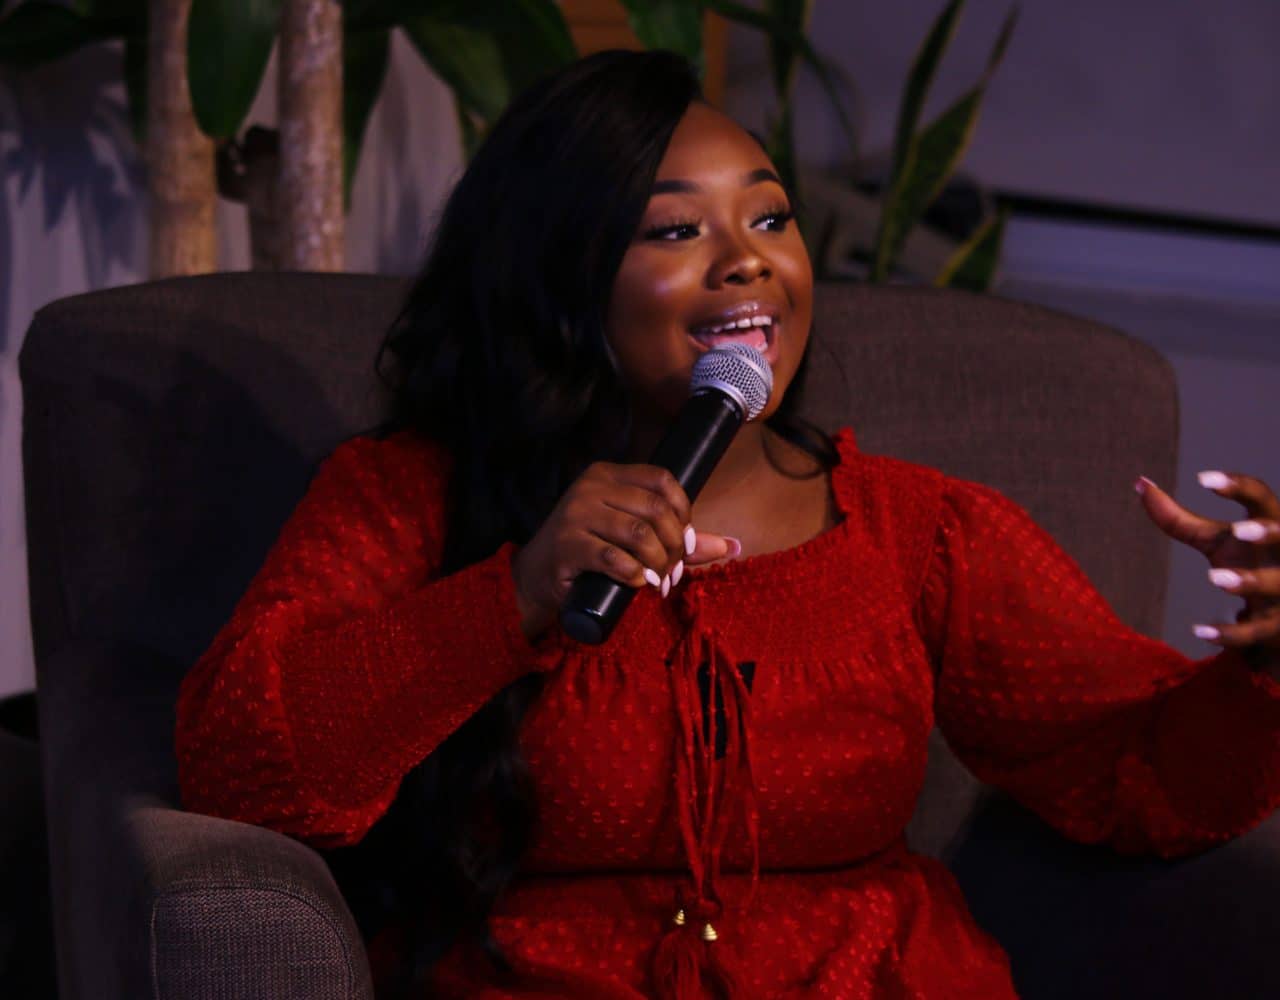 Jekalyn Carr’s Message for the People: “You Were Born a Champion!”